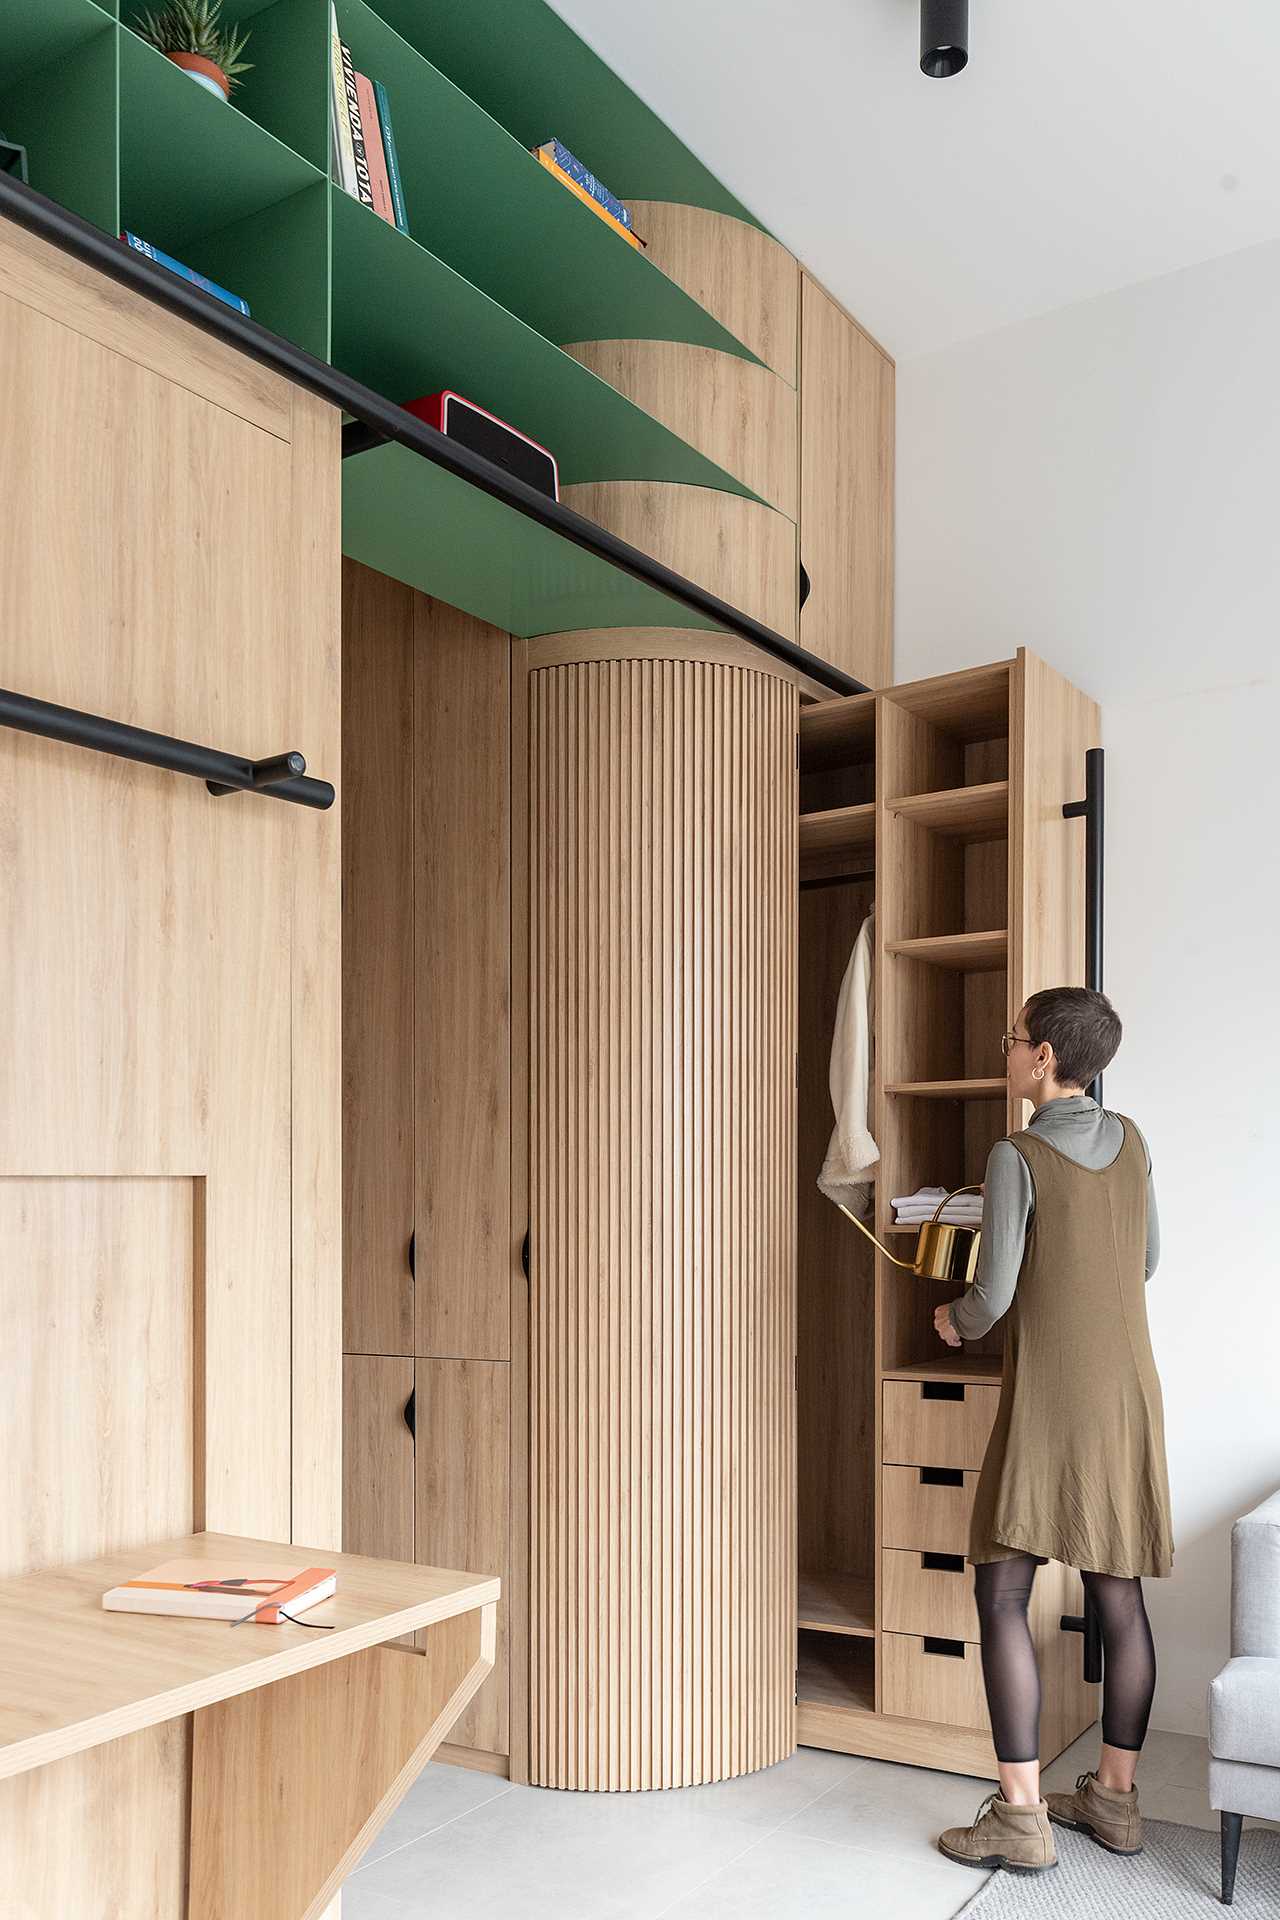 A hidden closet in this small apartment slides out to reveal drawers, shelves, and an space to hang clothes.